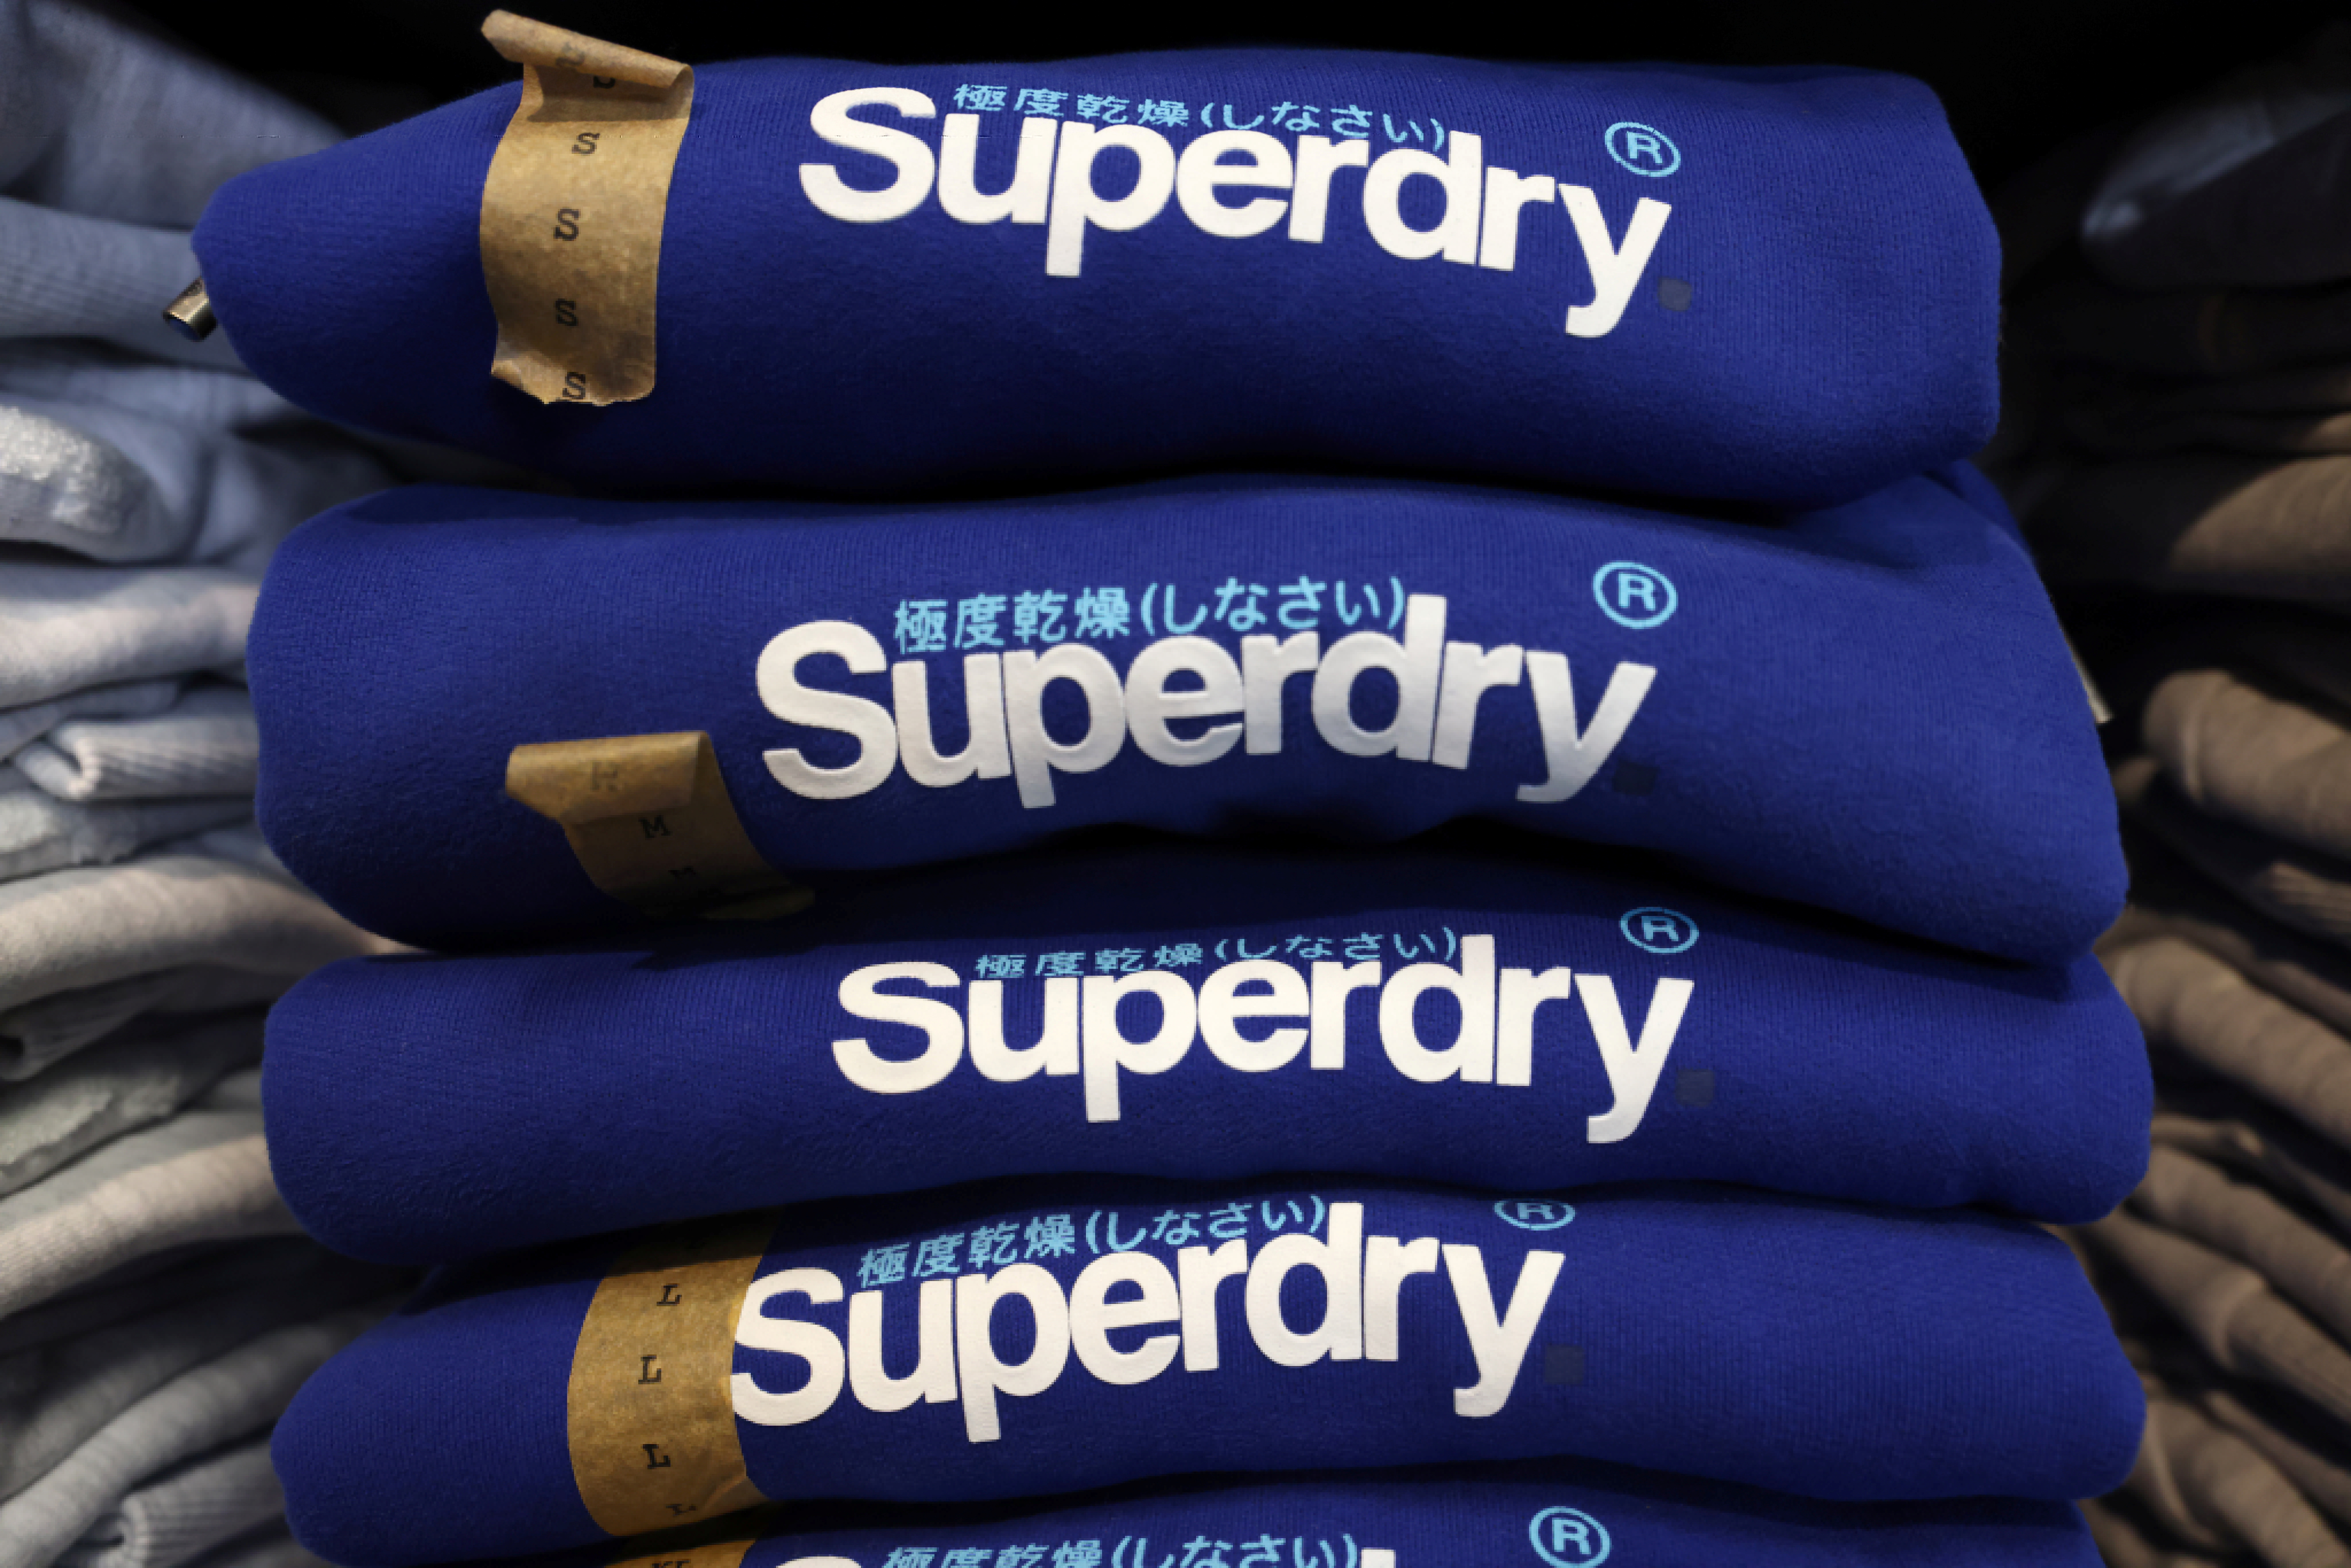 Superdry expects little revenue growth after reporting annual loss